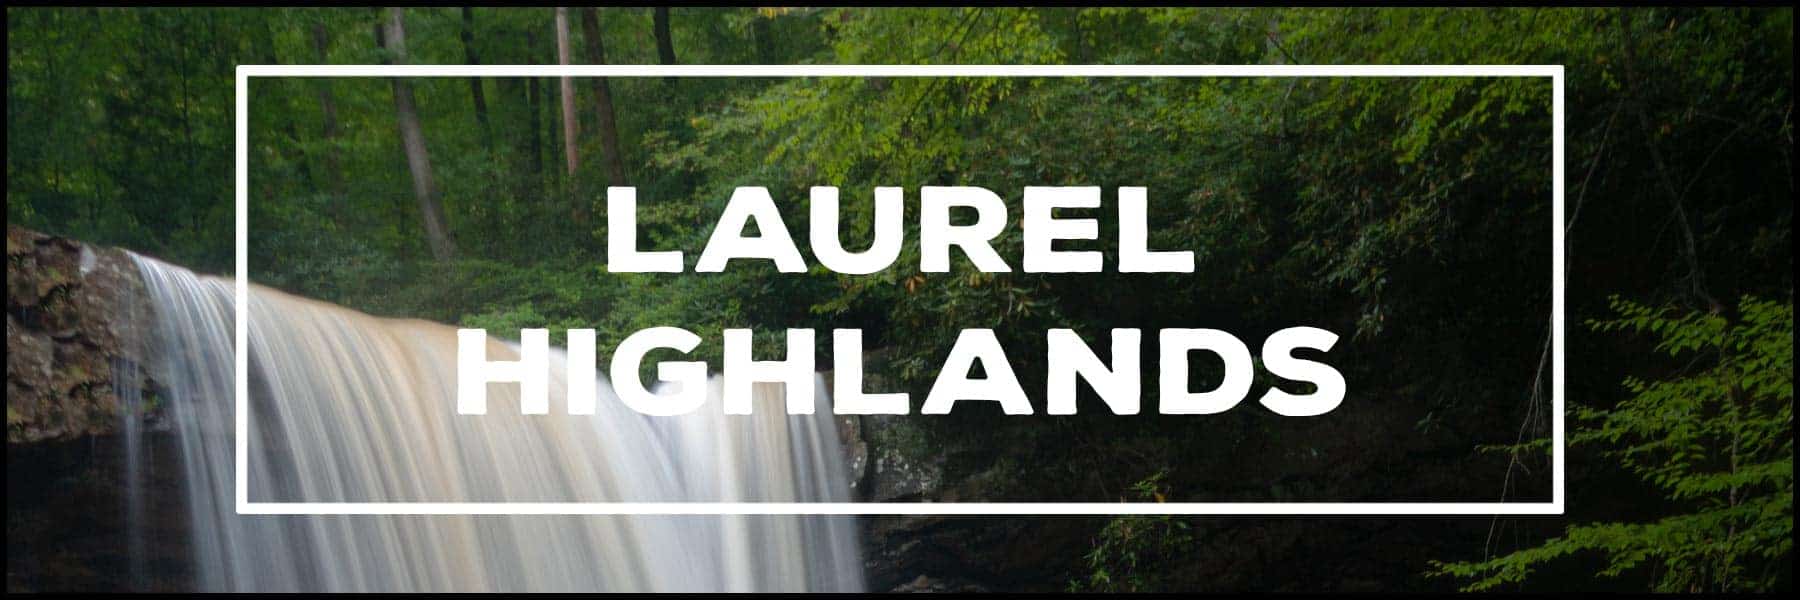 The best things to do in the Laurel Highlands of Pennsylvania